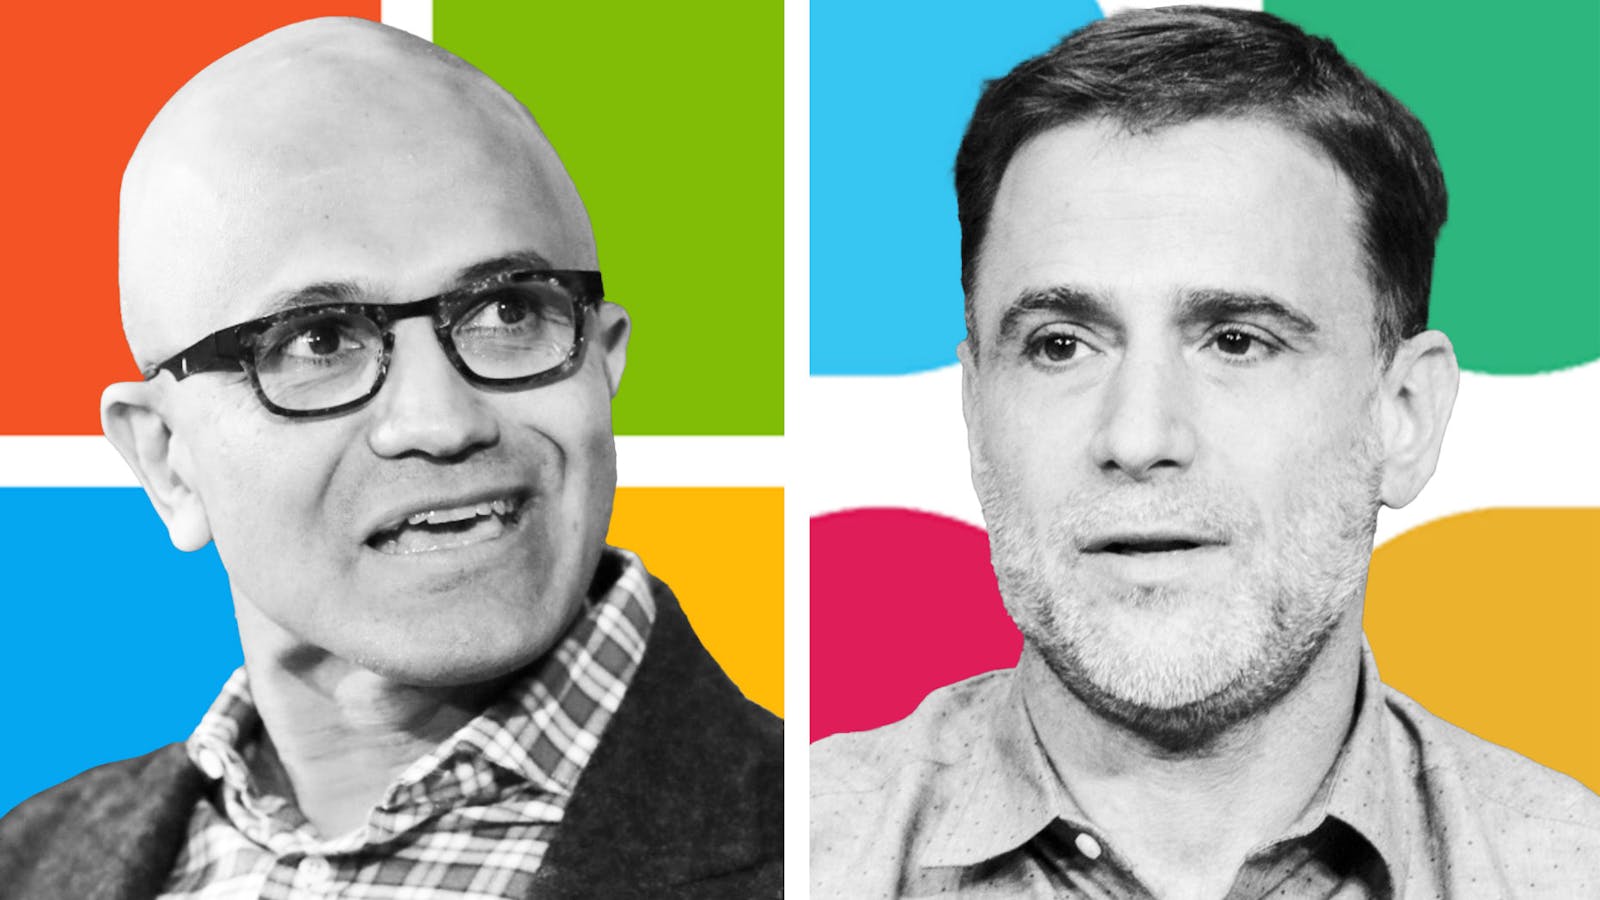 Microsoft CEO Satya Nadella, left, and Slack CEO Stewart Butterfield. Photos by Bloomberg